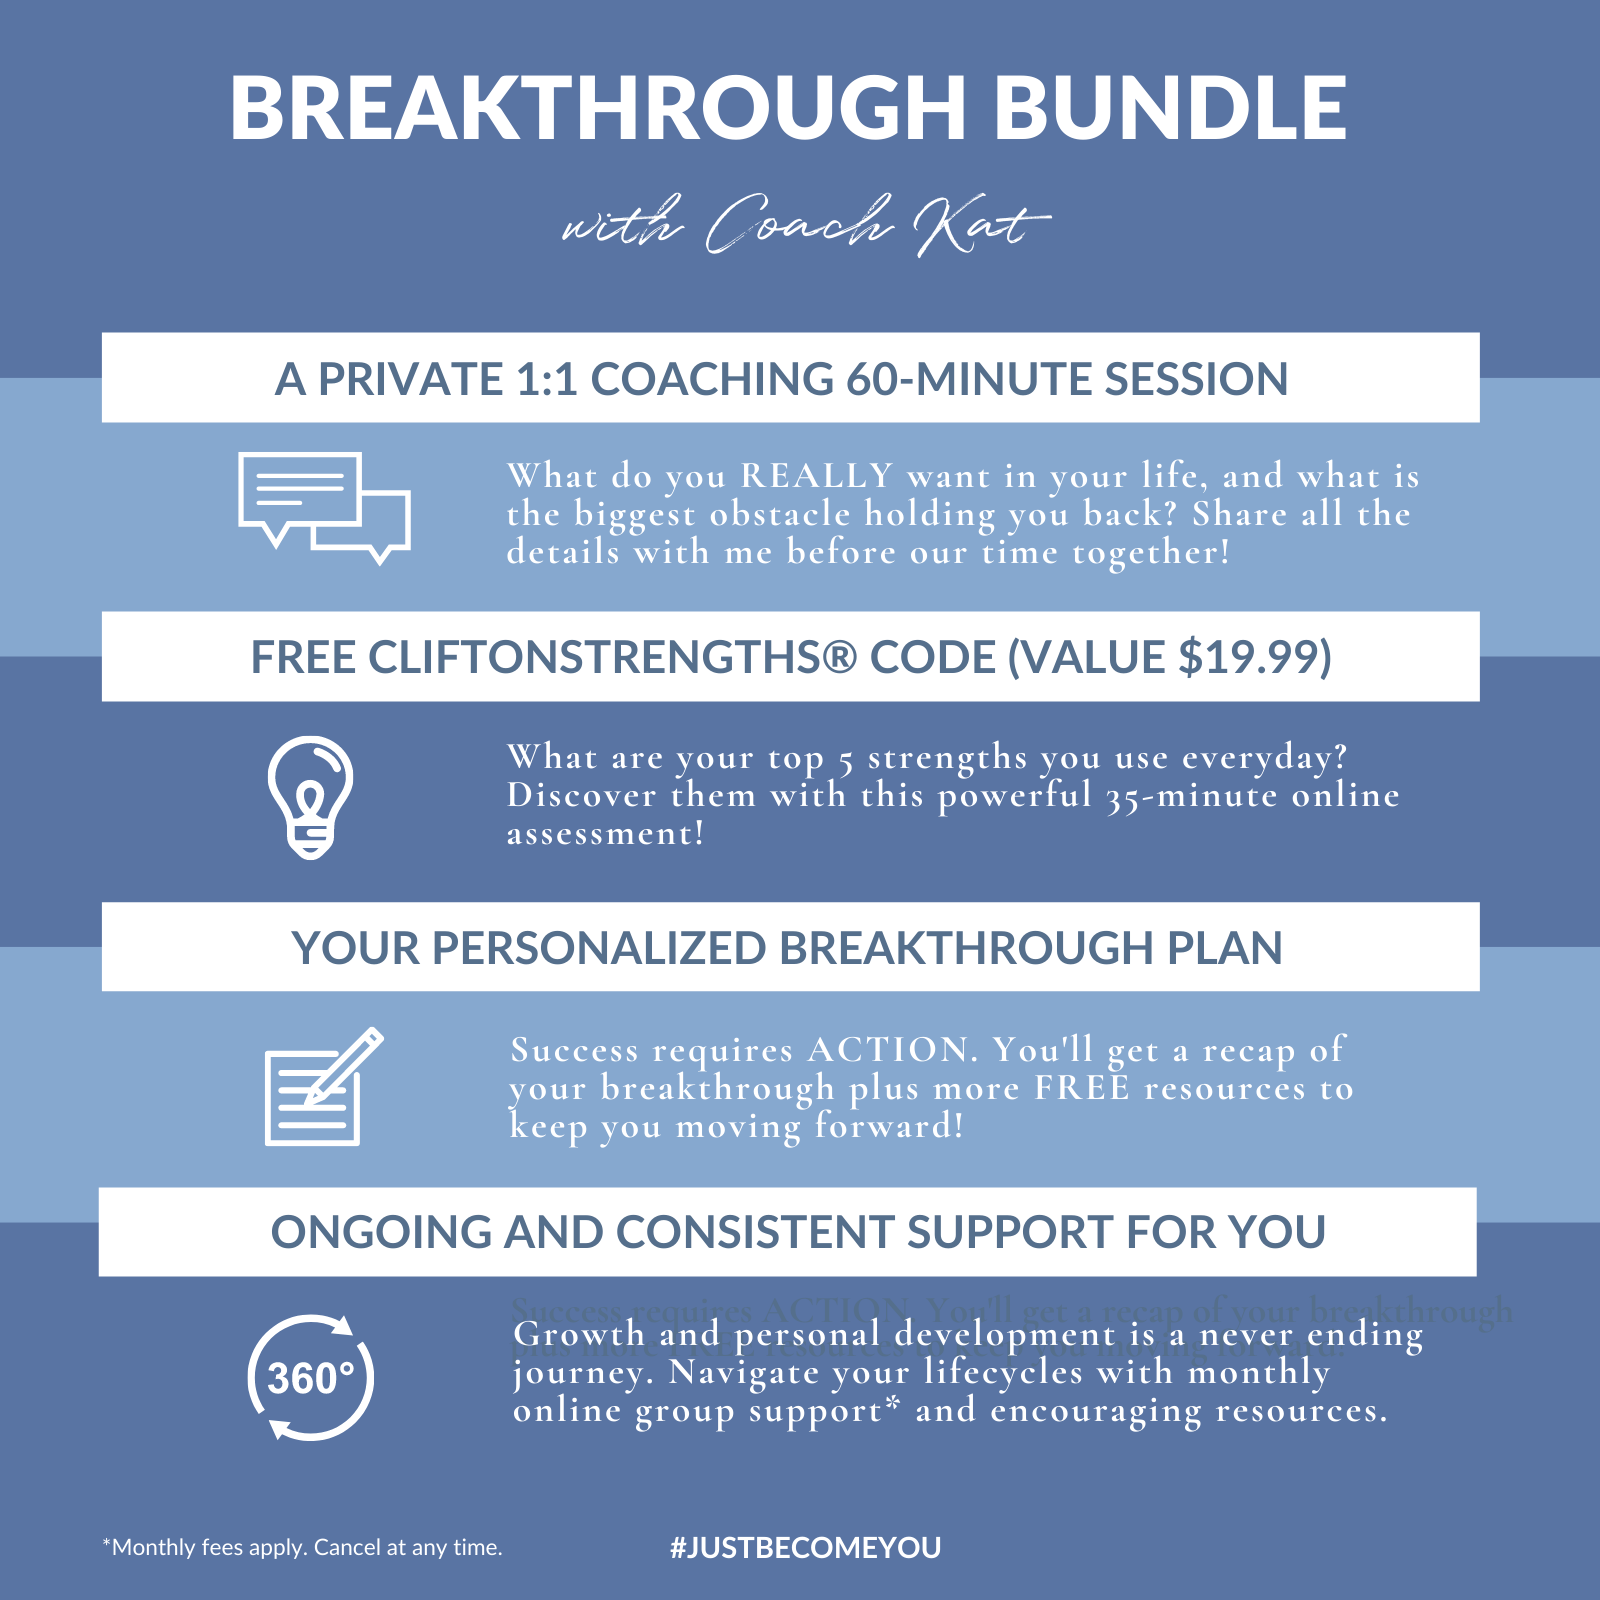 Your breakthrough includes a private 1:1 30-minute coaching session, assessment code, personalized breakthrough plan.